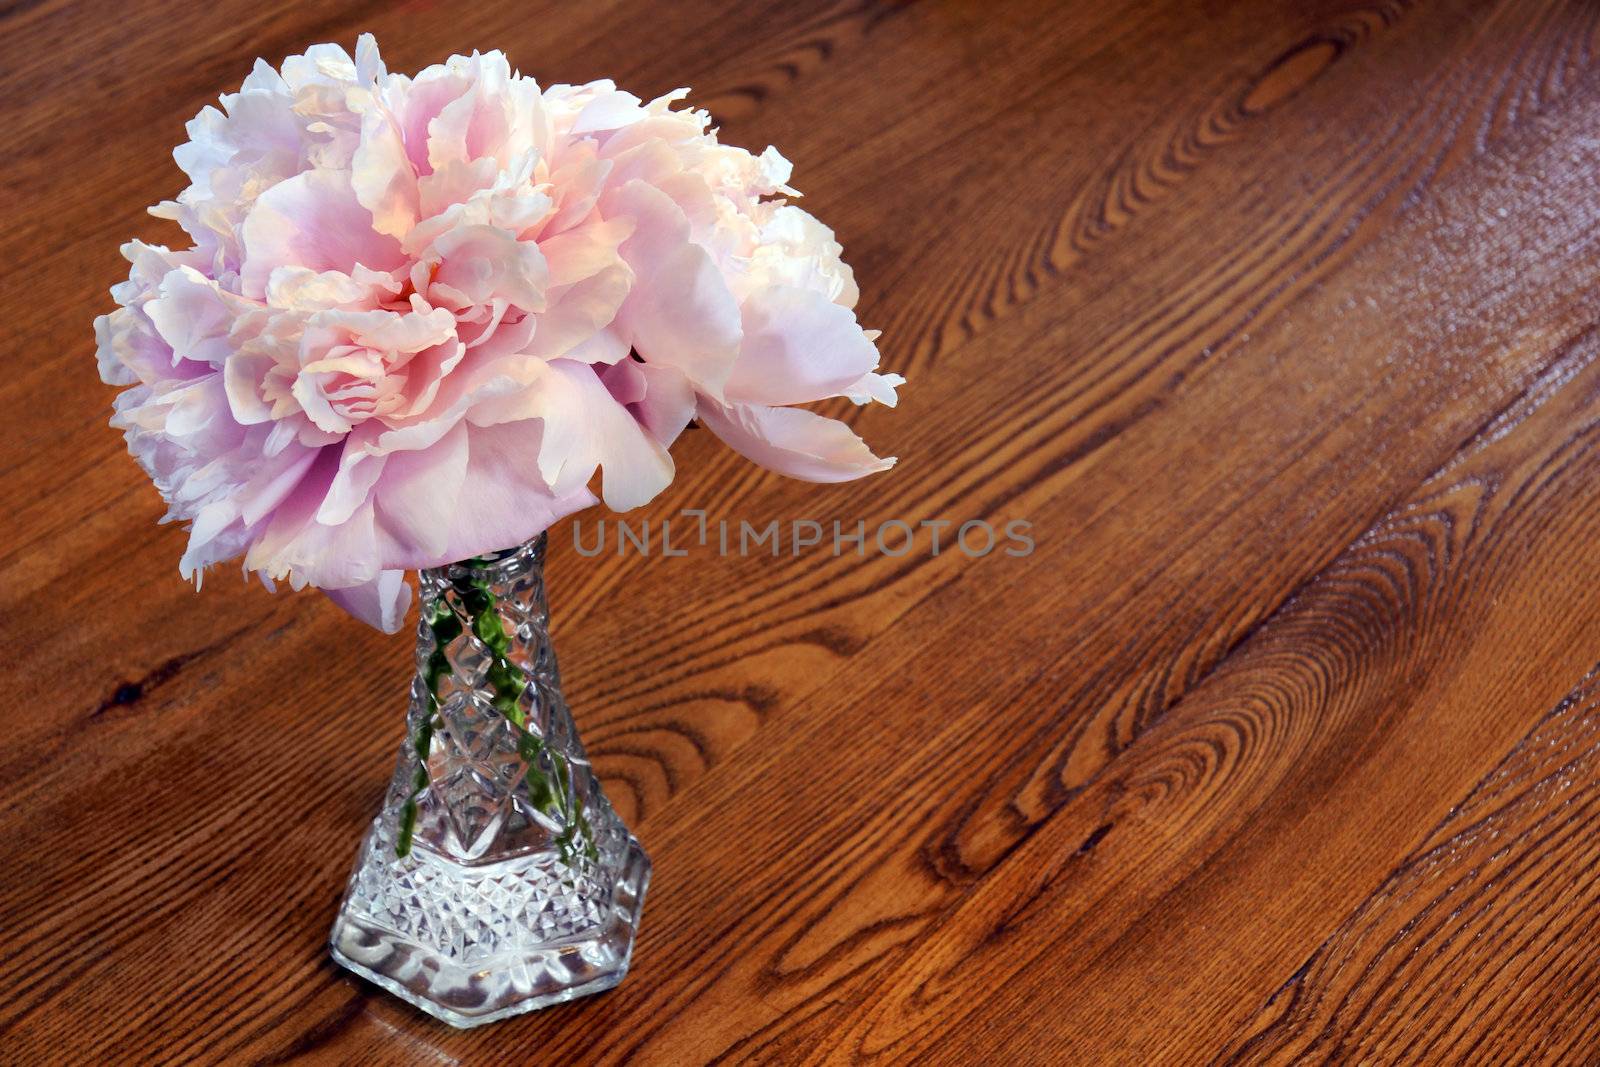 Peony flowers on wooden table by Mirage3